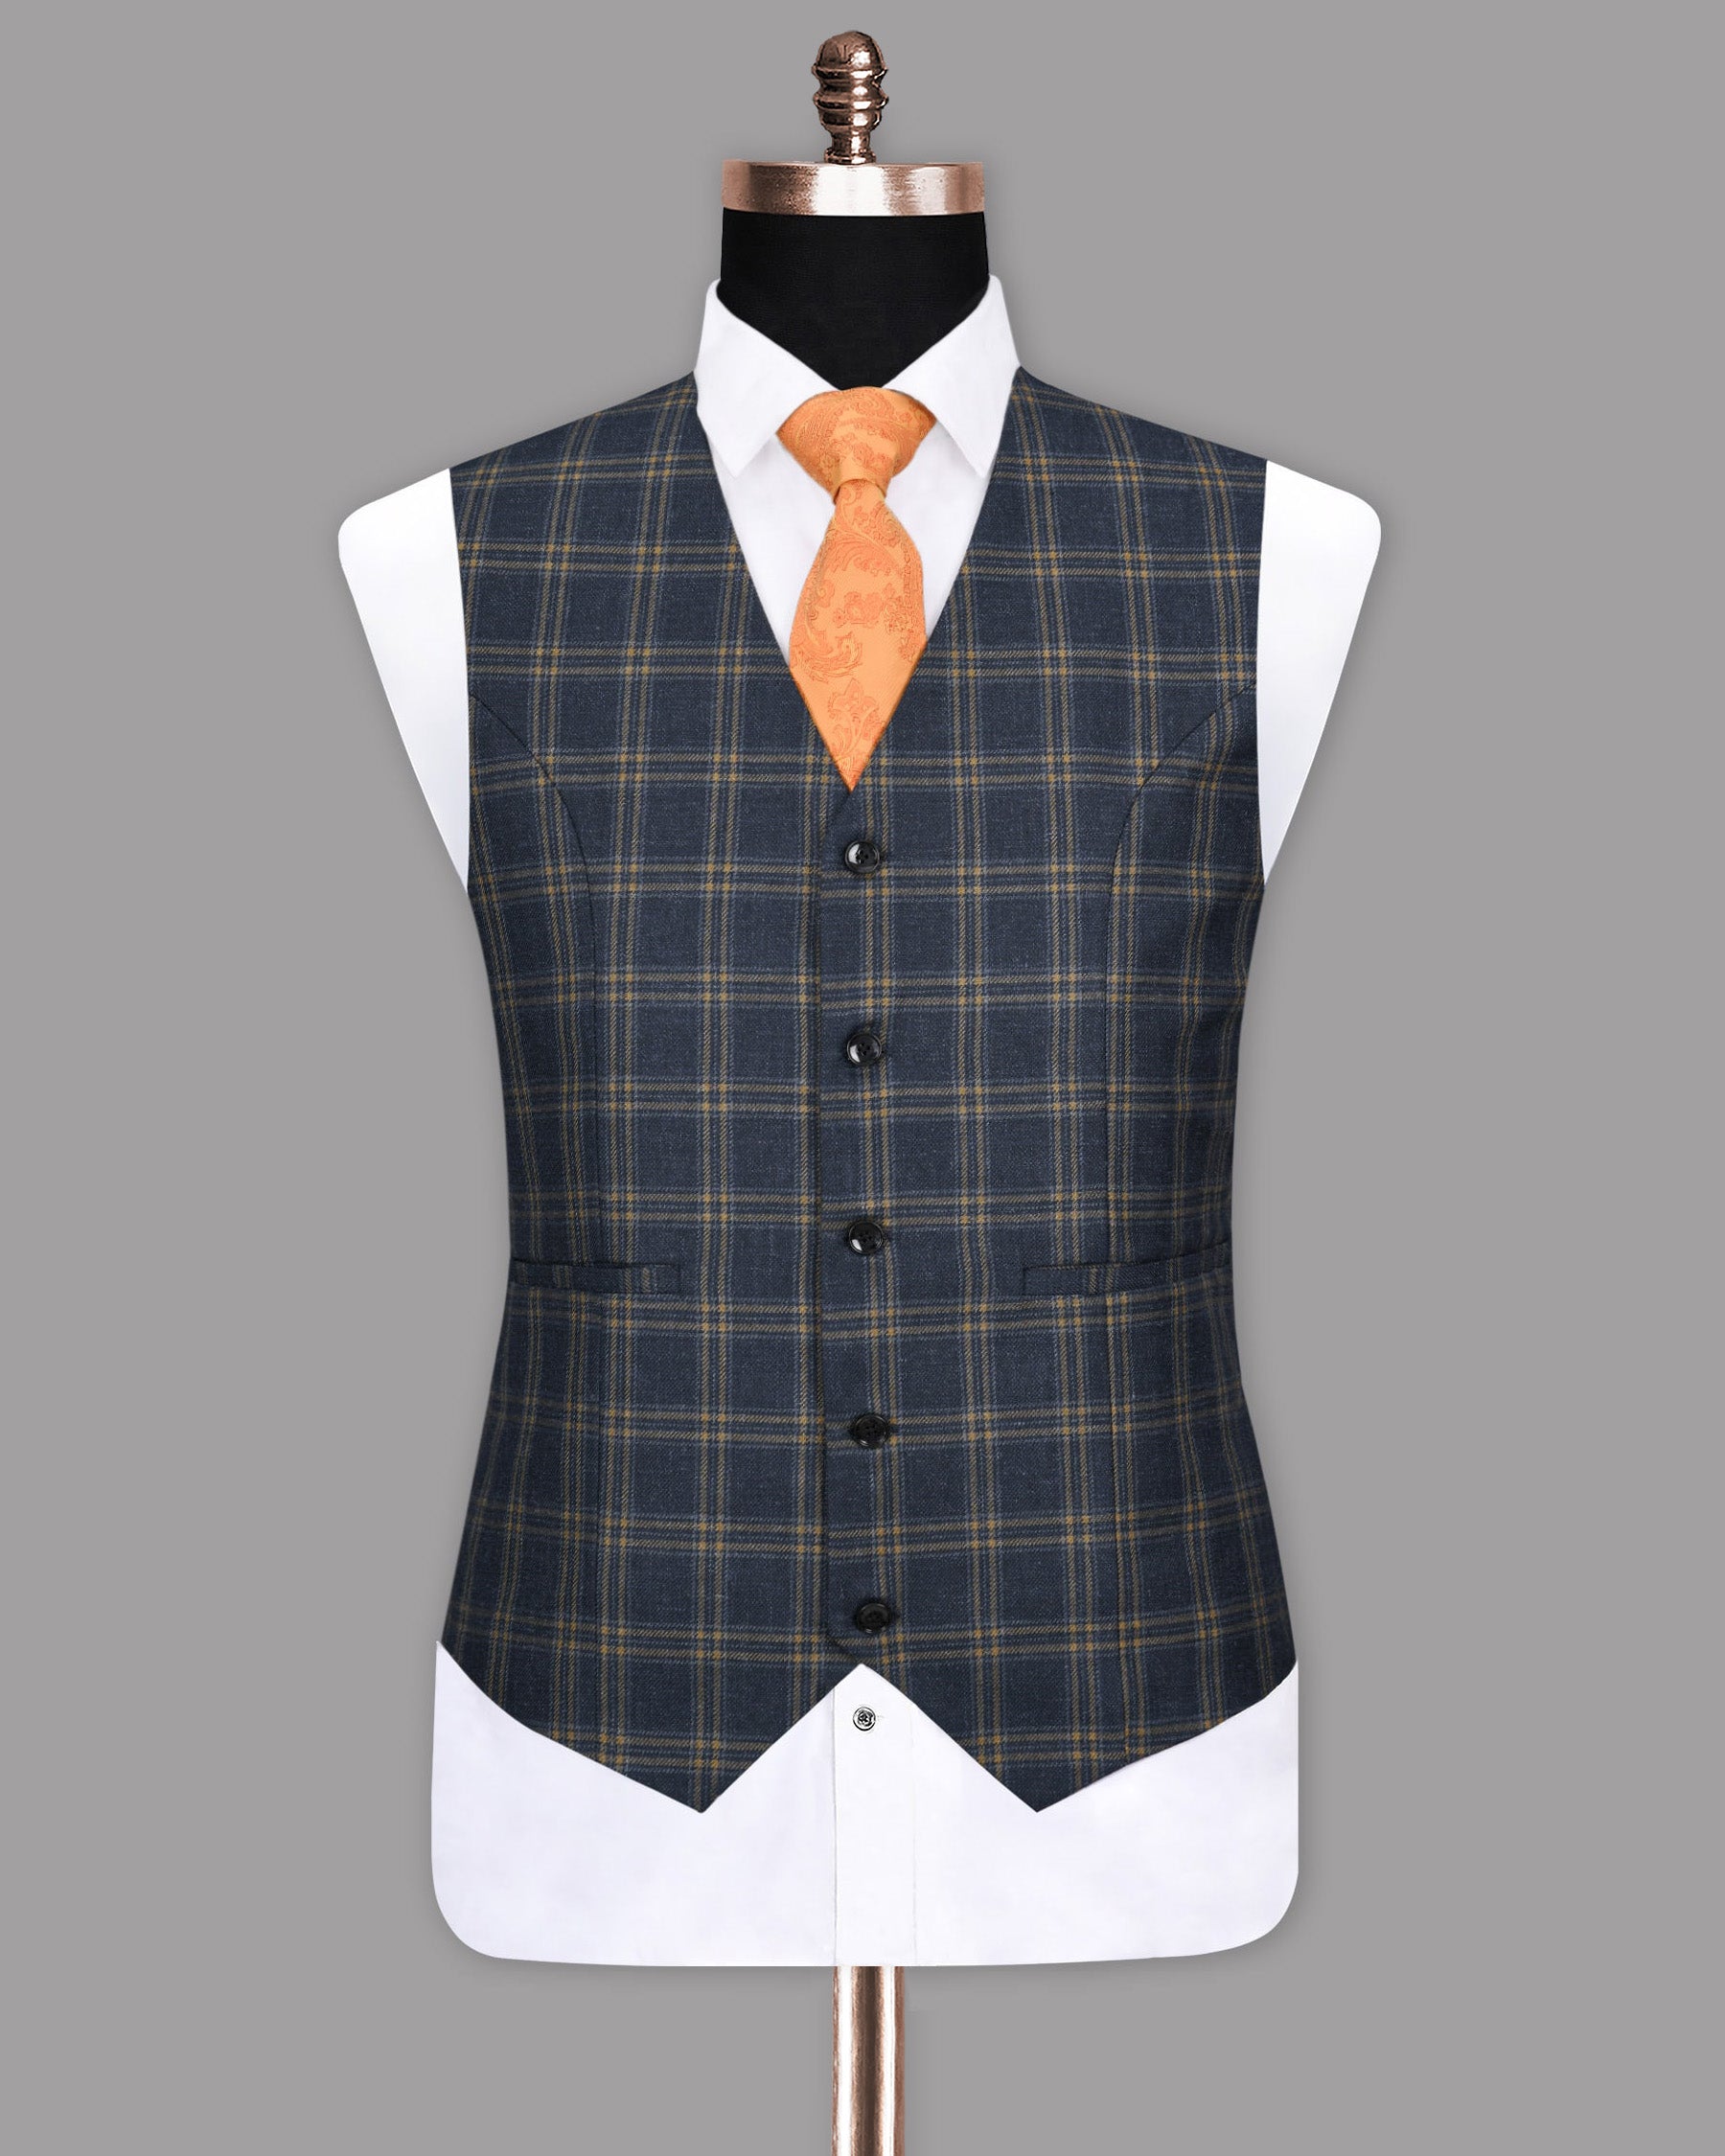 Martinique Blue with Driftwood Brown Windowpane Waistcoat V1136-36, V1136-44, V1136-46, V1136-52, V1136-58, V1136-60, V1136-50, V1136-38, V1136-42, V1136-54, V1136-56, V1136-48, V1136-40